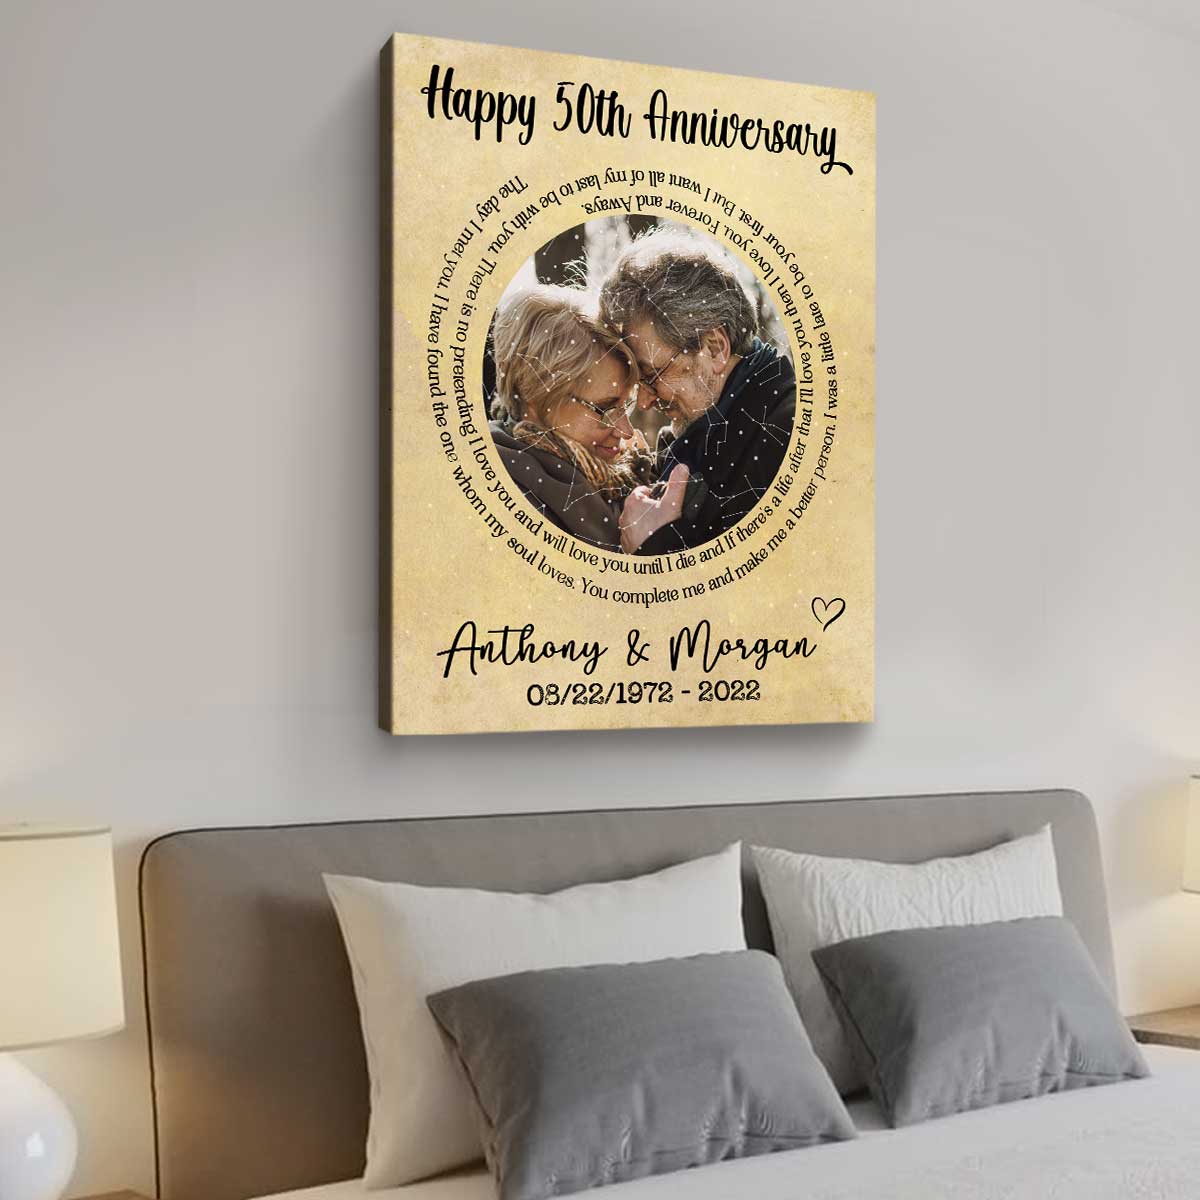 Buy 50th Anniversary Wedding Gifts for Couple 50 Years of Marriage Gift for  Parents Golden Marriage Anniversary Decorations Romantic Gifts for Him Her  Husband Wife Mom Dad Papa Nana Throw Blankets 50*60